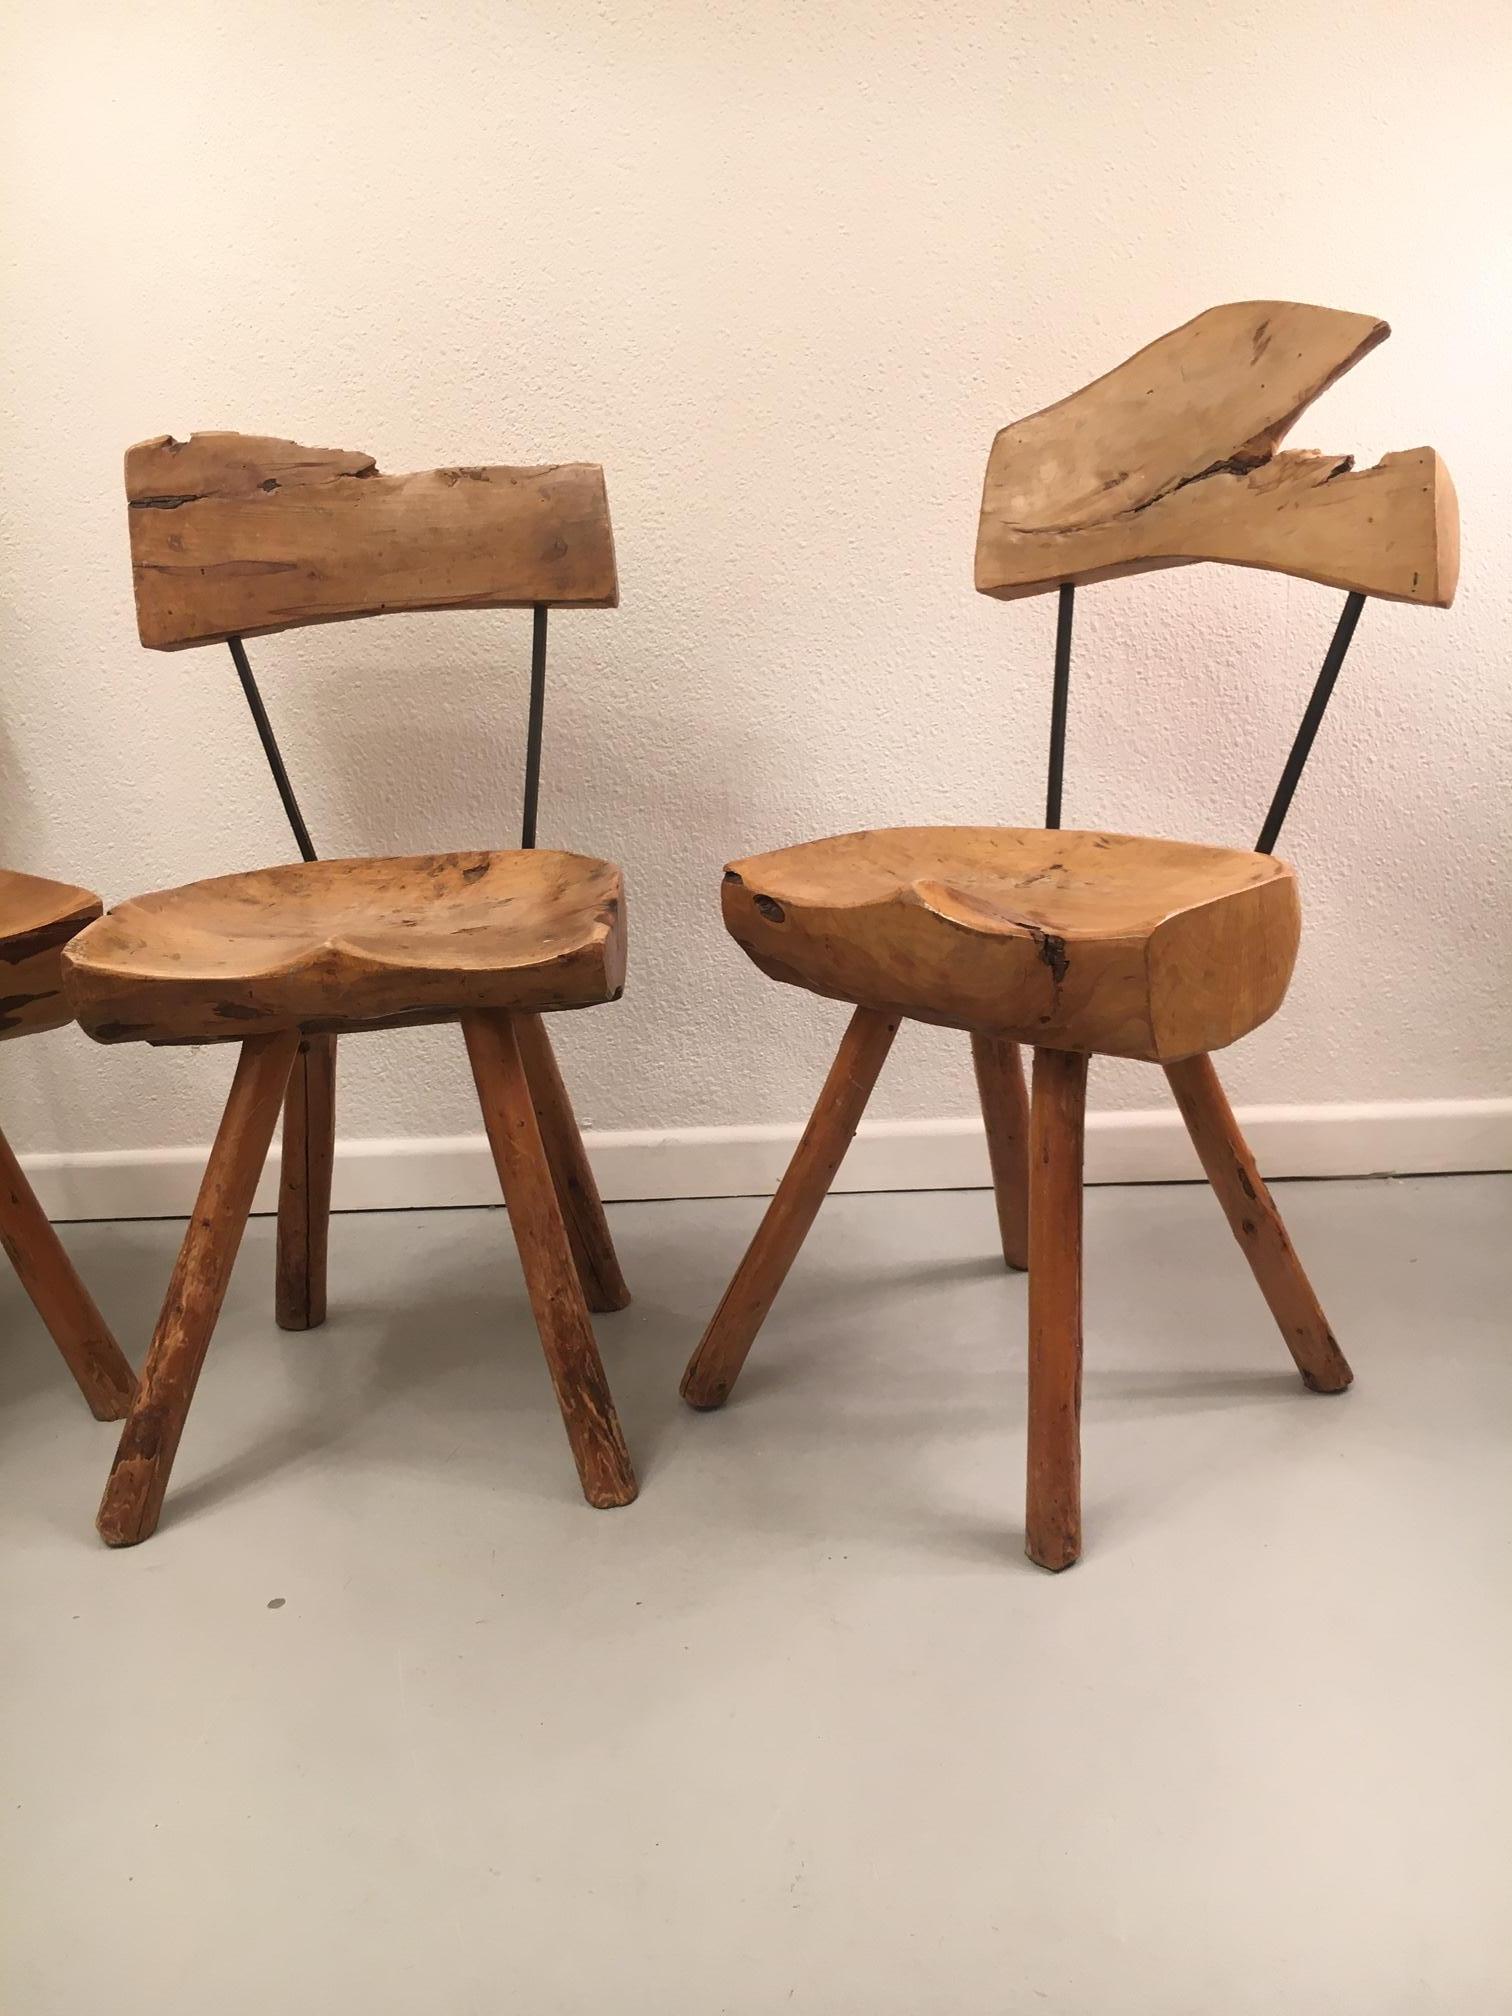 Set of 5 Solid Olive Wood Brutalist Rustic Dining Chairs, circa 1950s 1